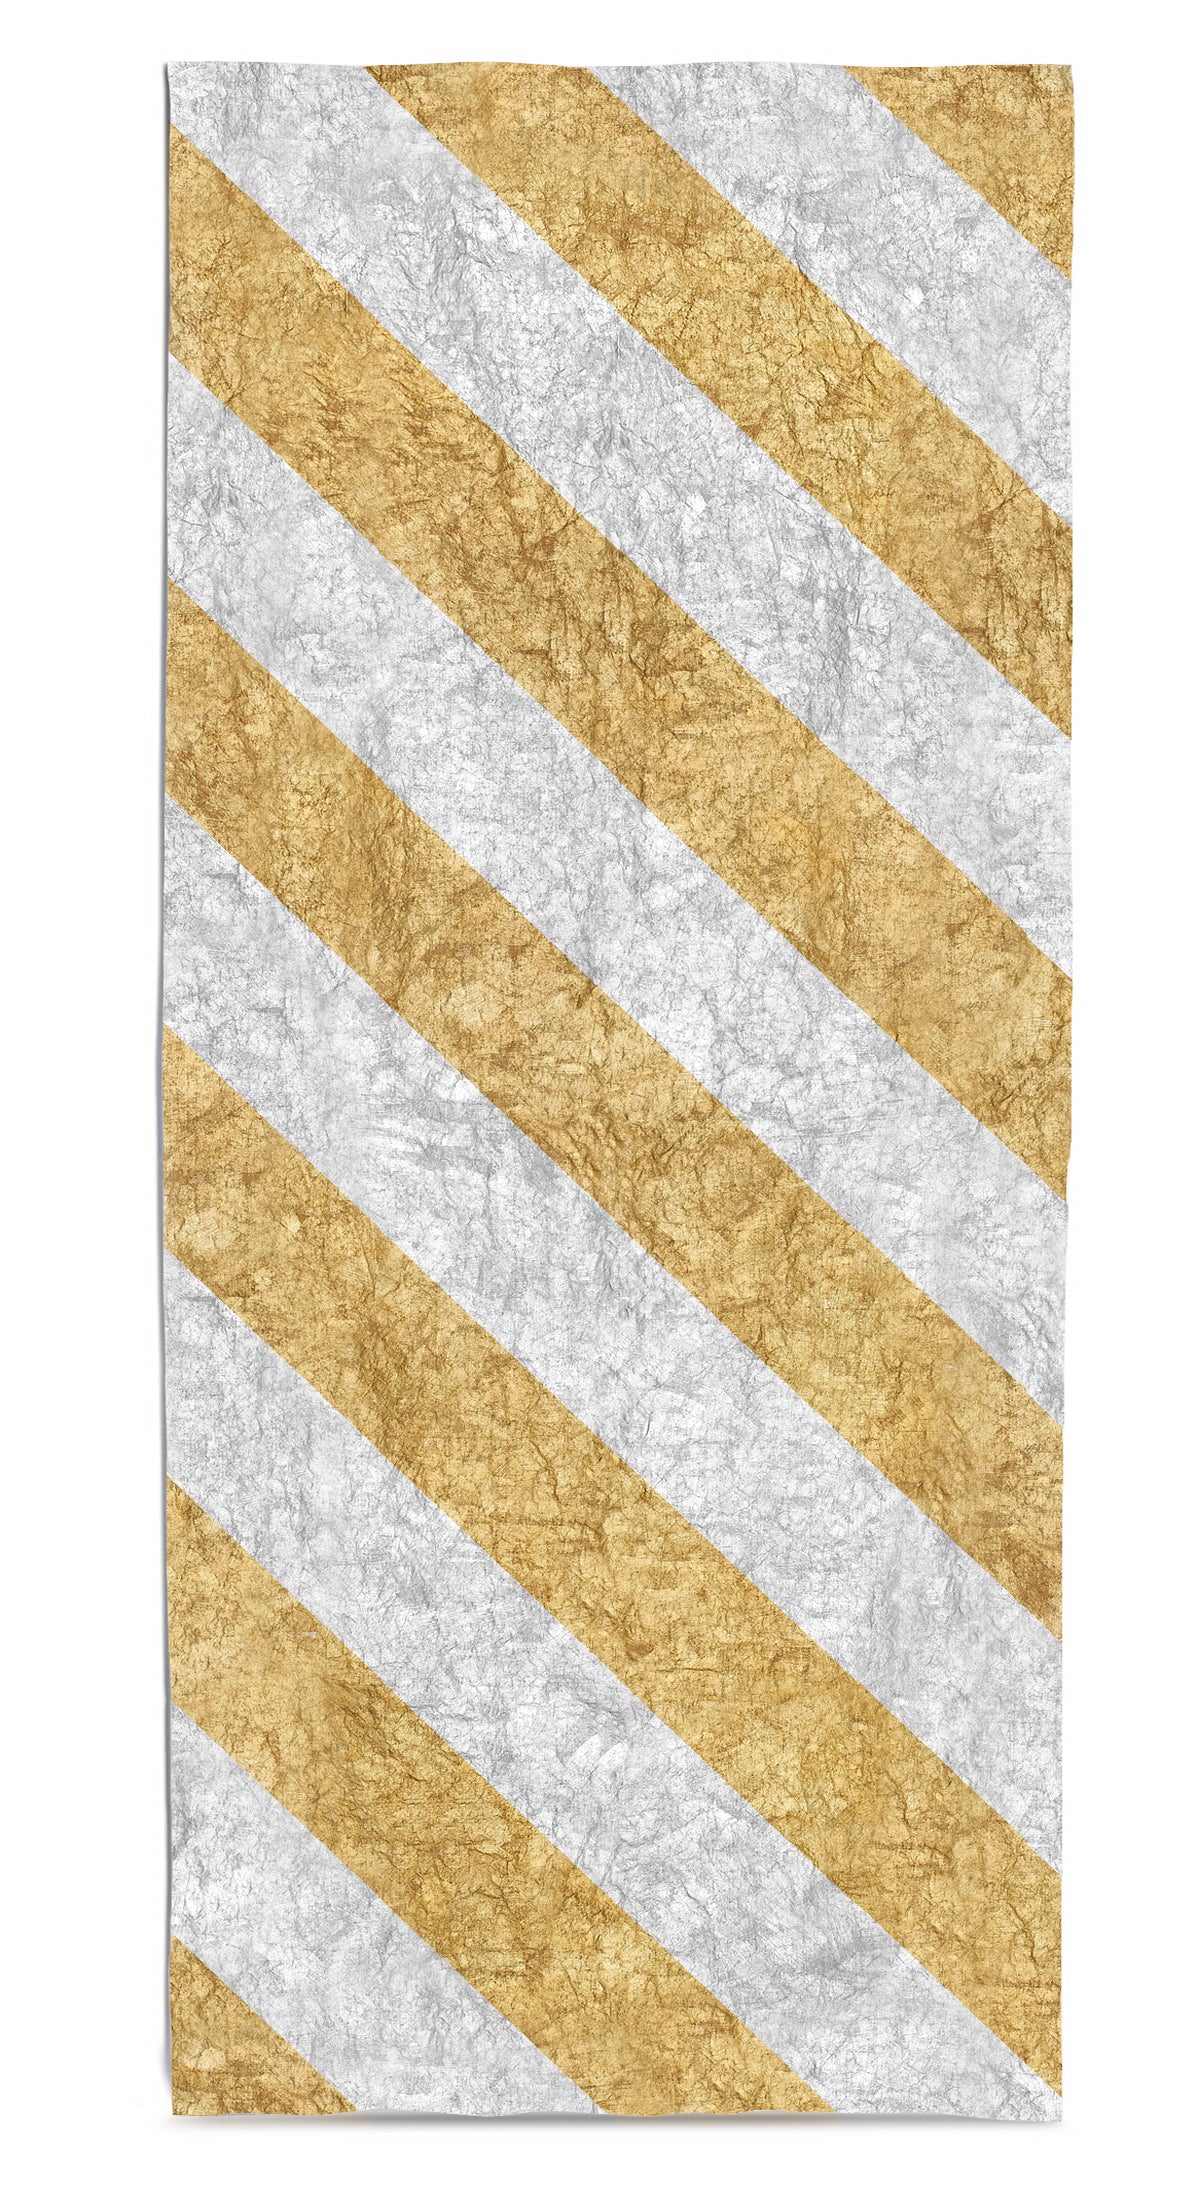 Stripe Linen Tablecloth in Gold & Silver